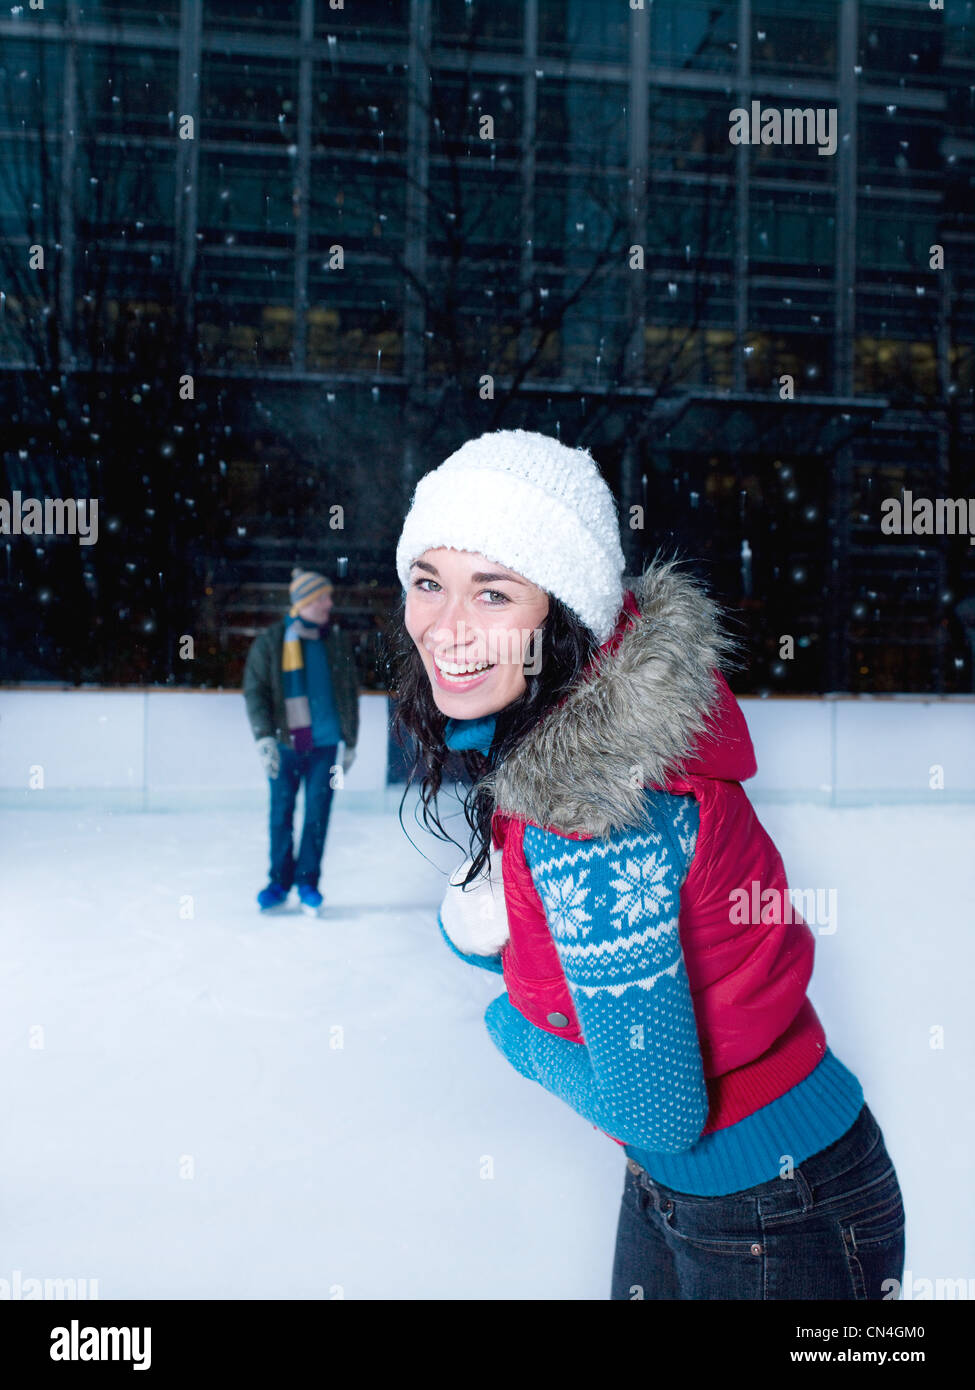 Woman skating on an ice rink in the snow Stock Photo